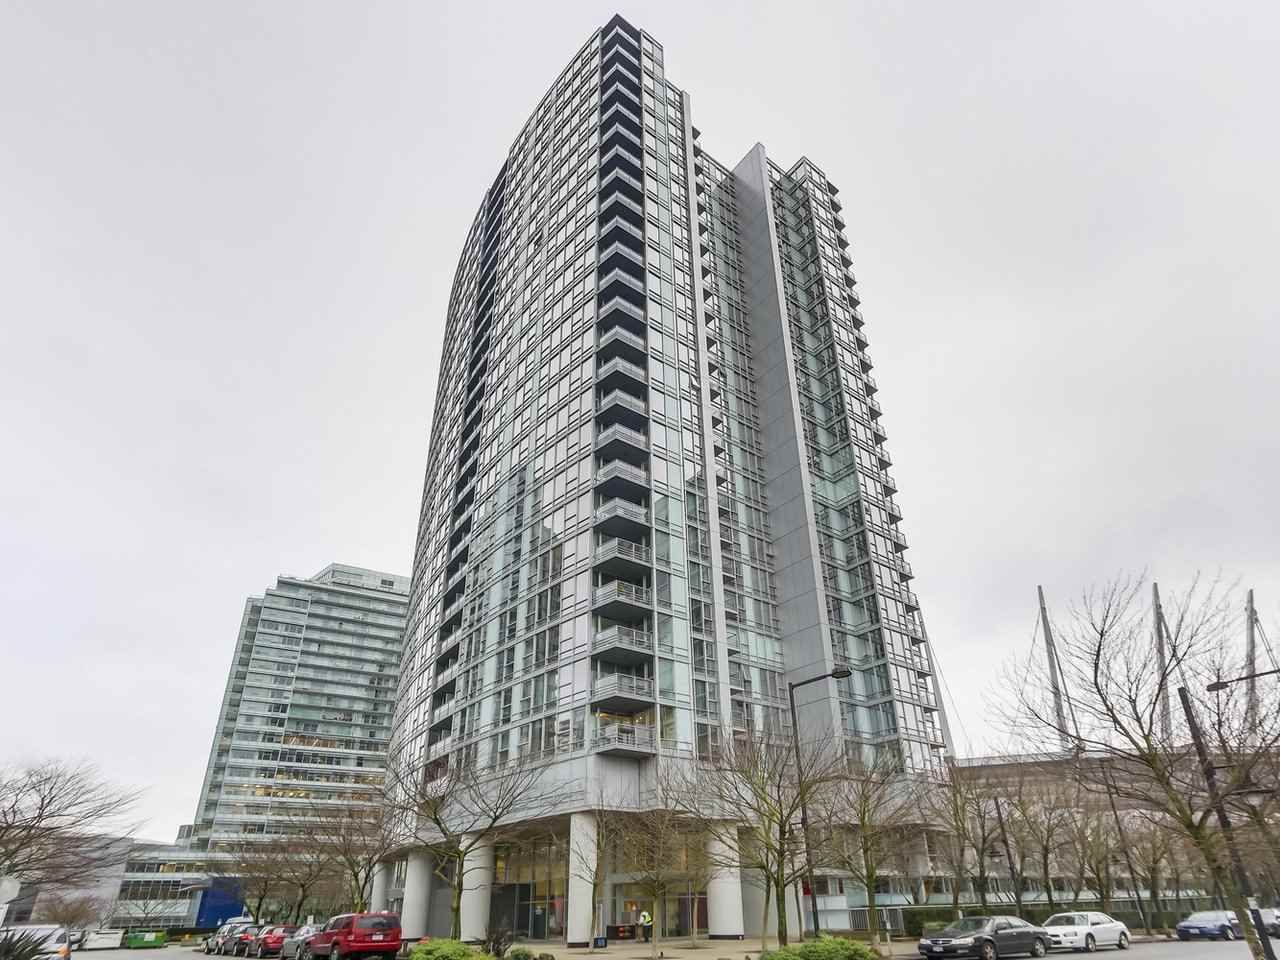 Main Photo: 1608 668 CITADEL PARADE in Vancouver: Downtown VW Condo for sale (Vancouver West)  : MLS®# R2327294